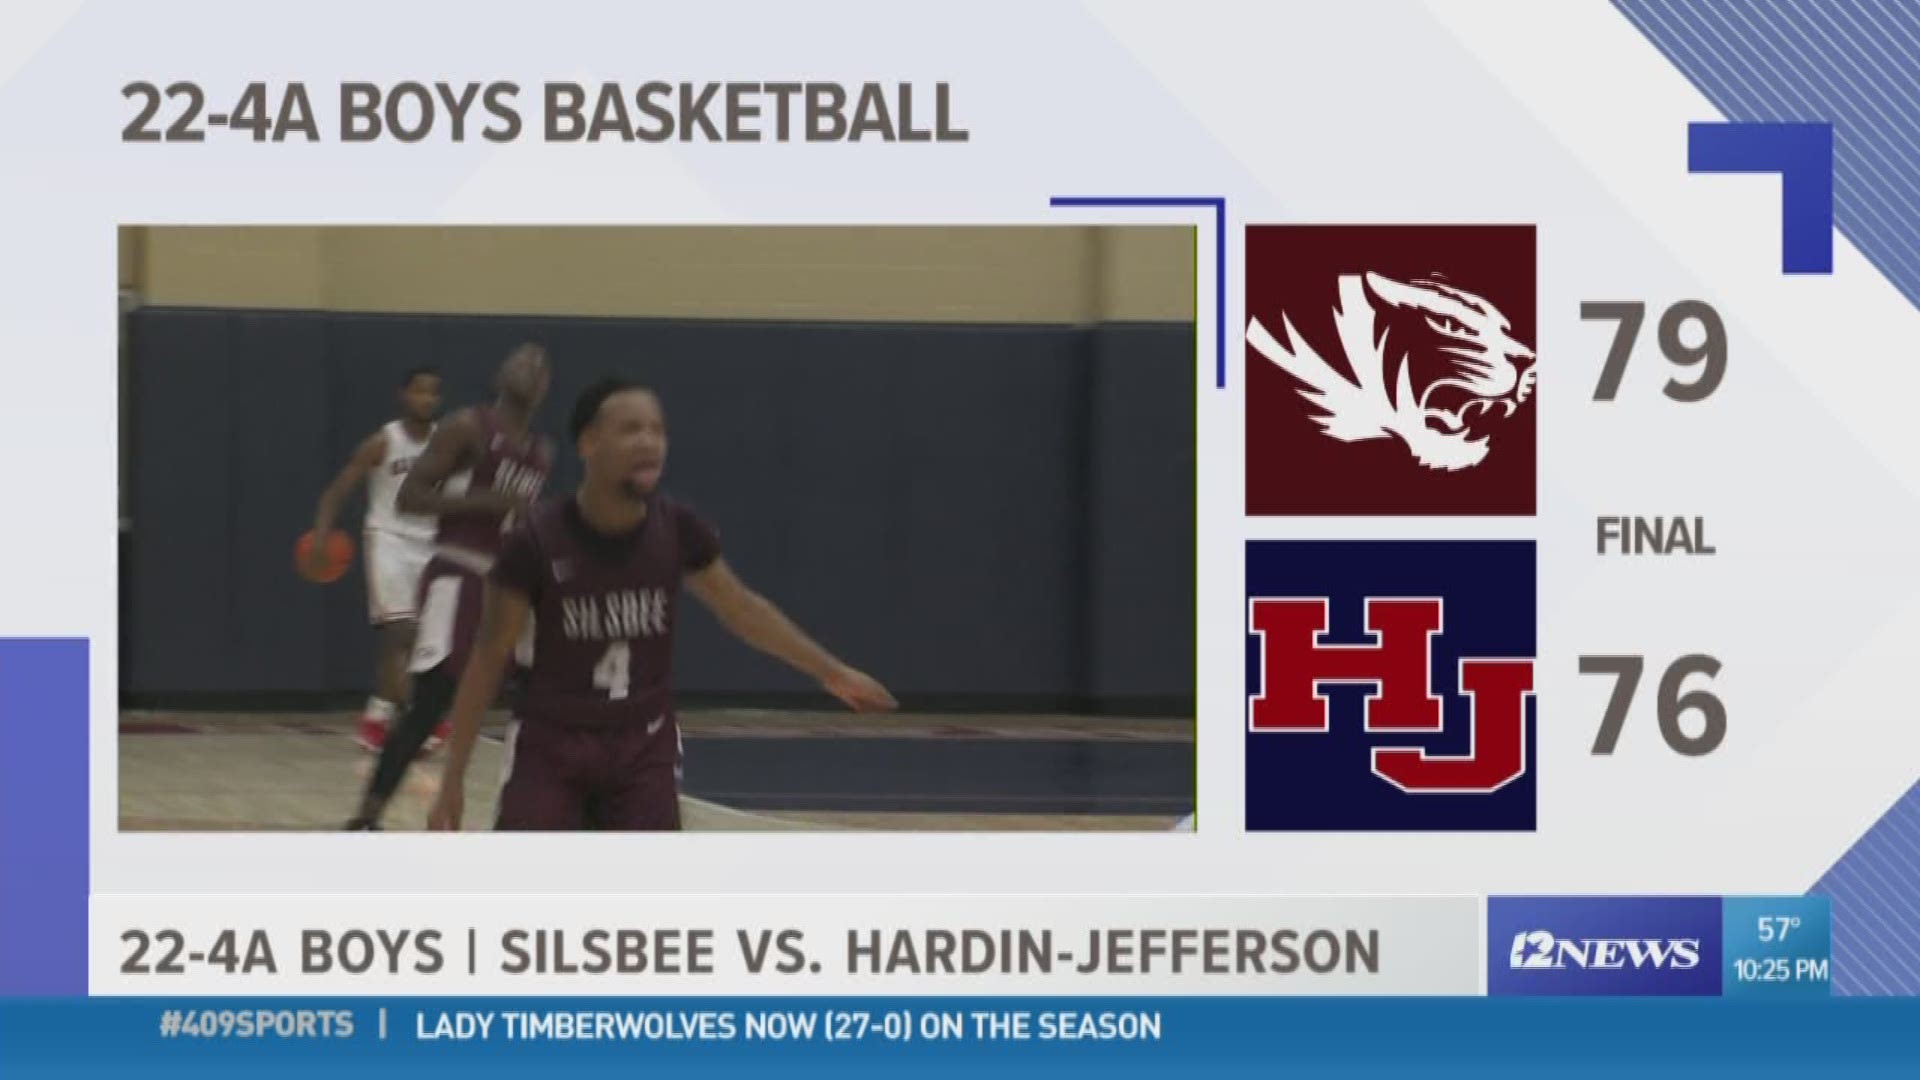 Round one of this year's Silsbee-HJ series was a dandy that came down to the wire. Tigers wins it by three.